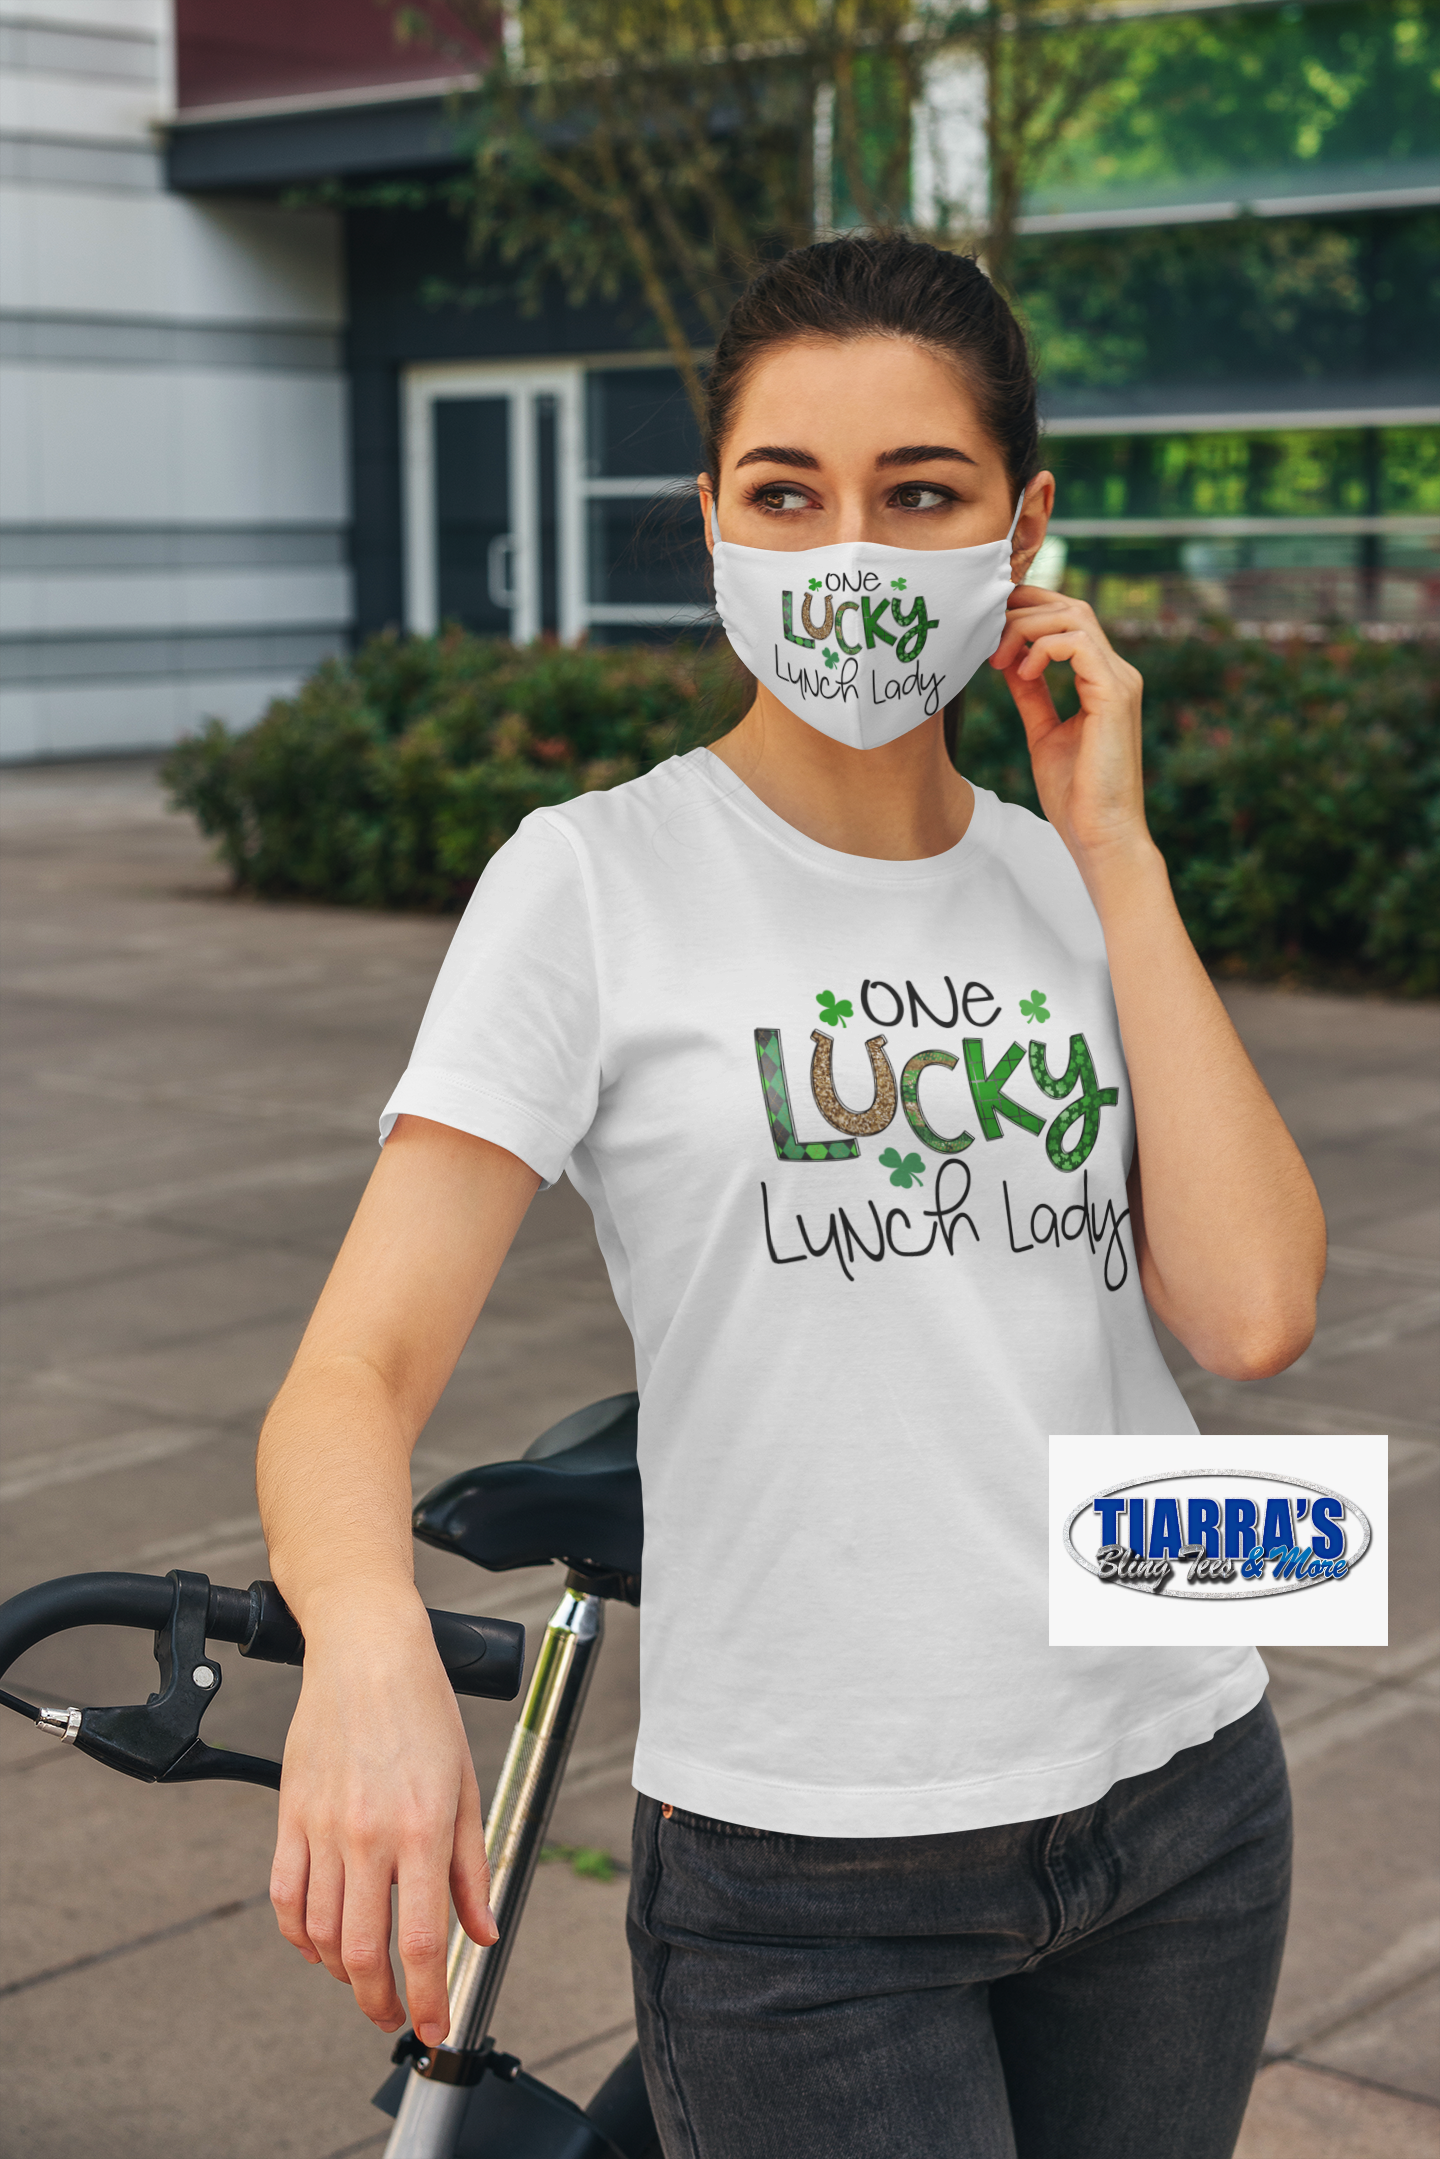 One Lucky Lunch Lady T-Shirt w/ Optional Matching Mask